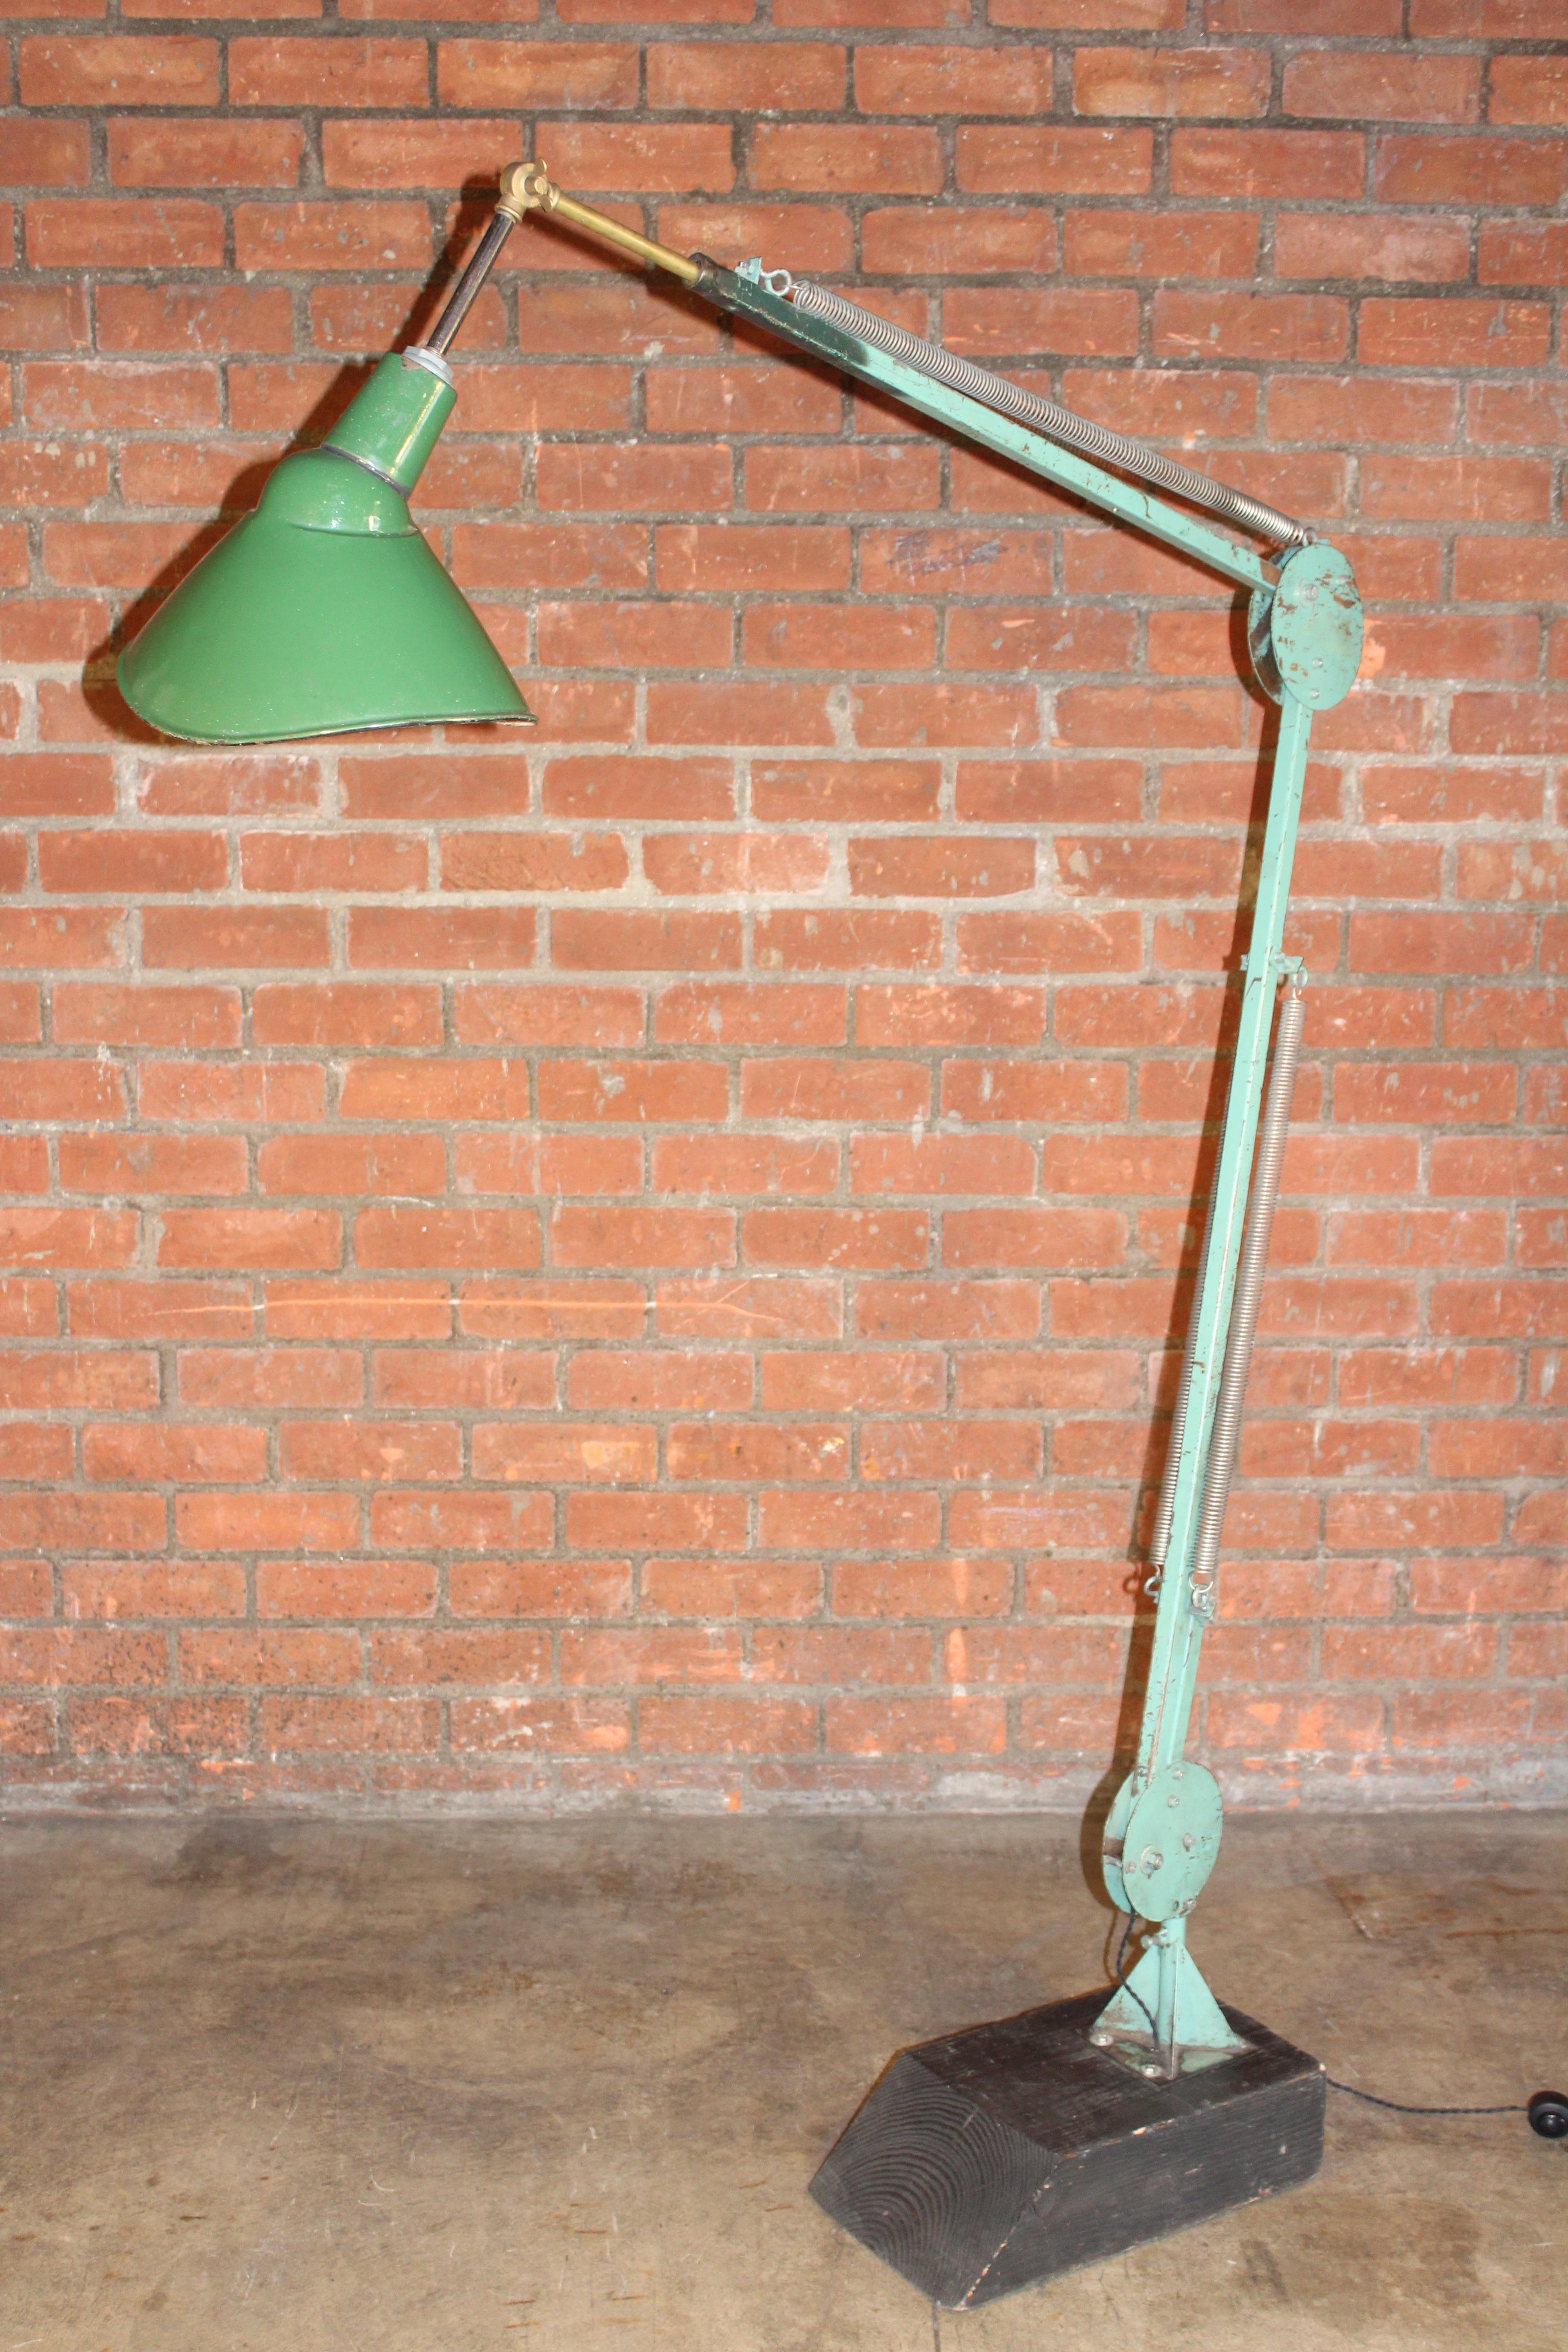 A vintage industrial pivoting and adjustable floor lamp. Newly rewired. Features a wooden base. The painted finish shows patina.